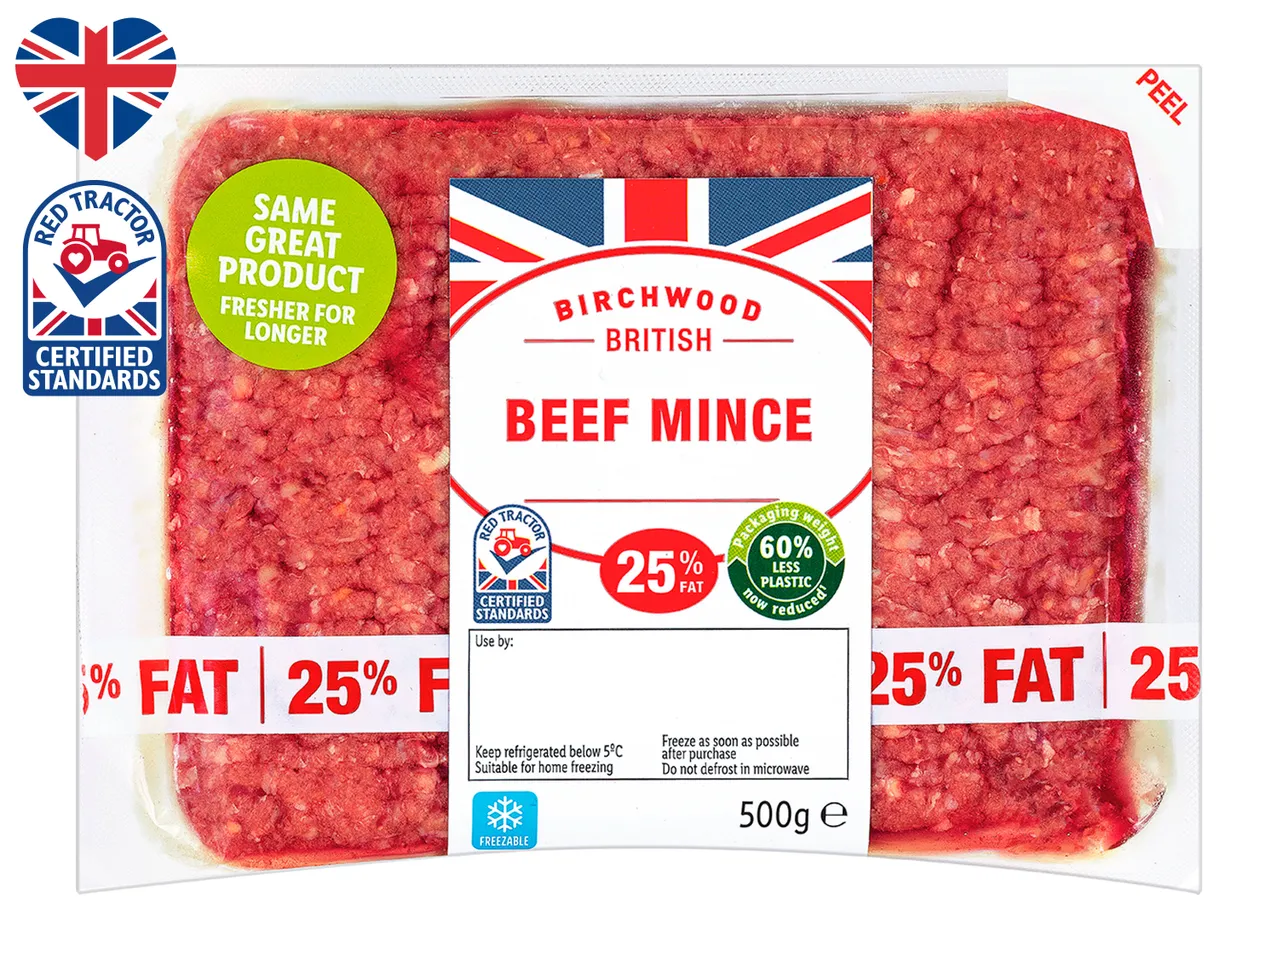 Go to full screen view: Birchwood British Beef Mince 25% Fat - Image 1